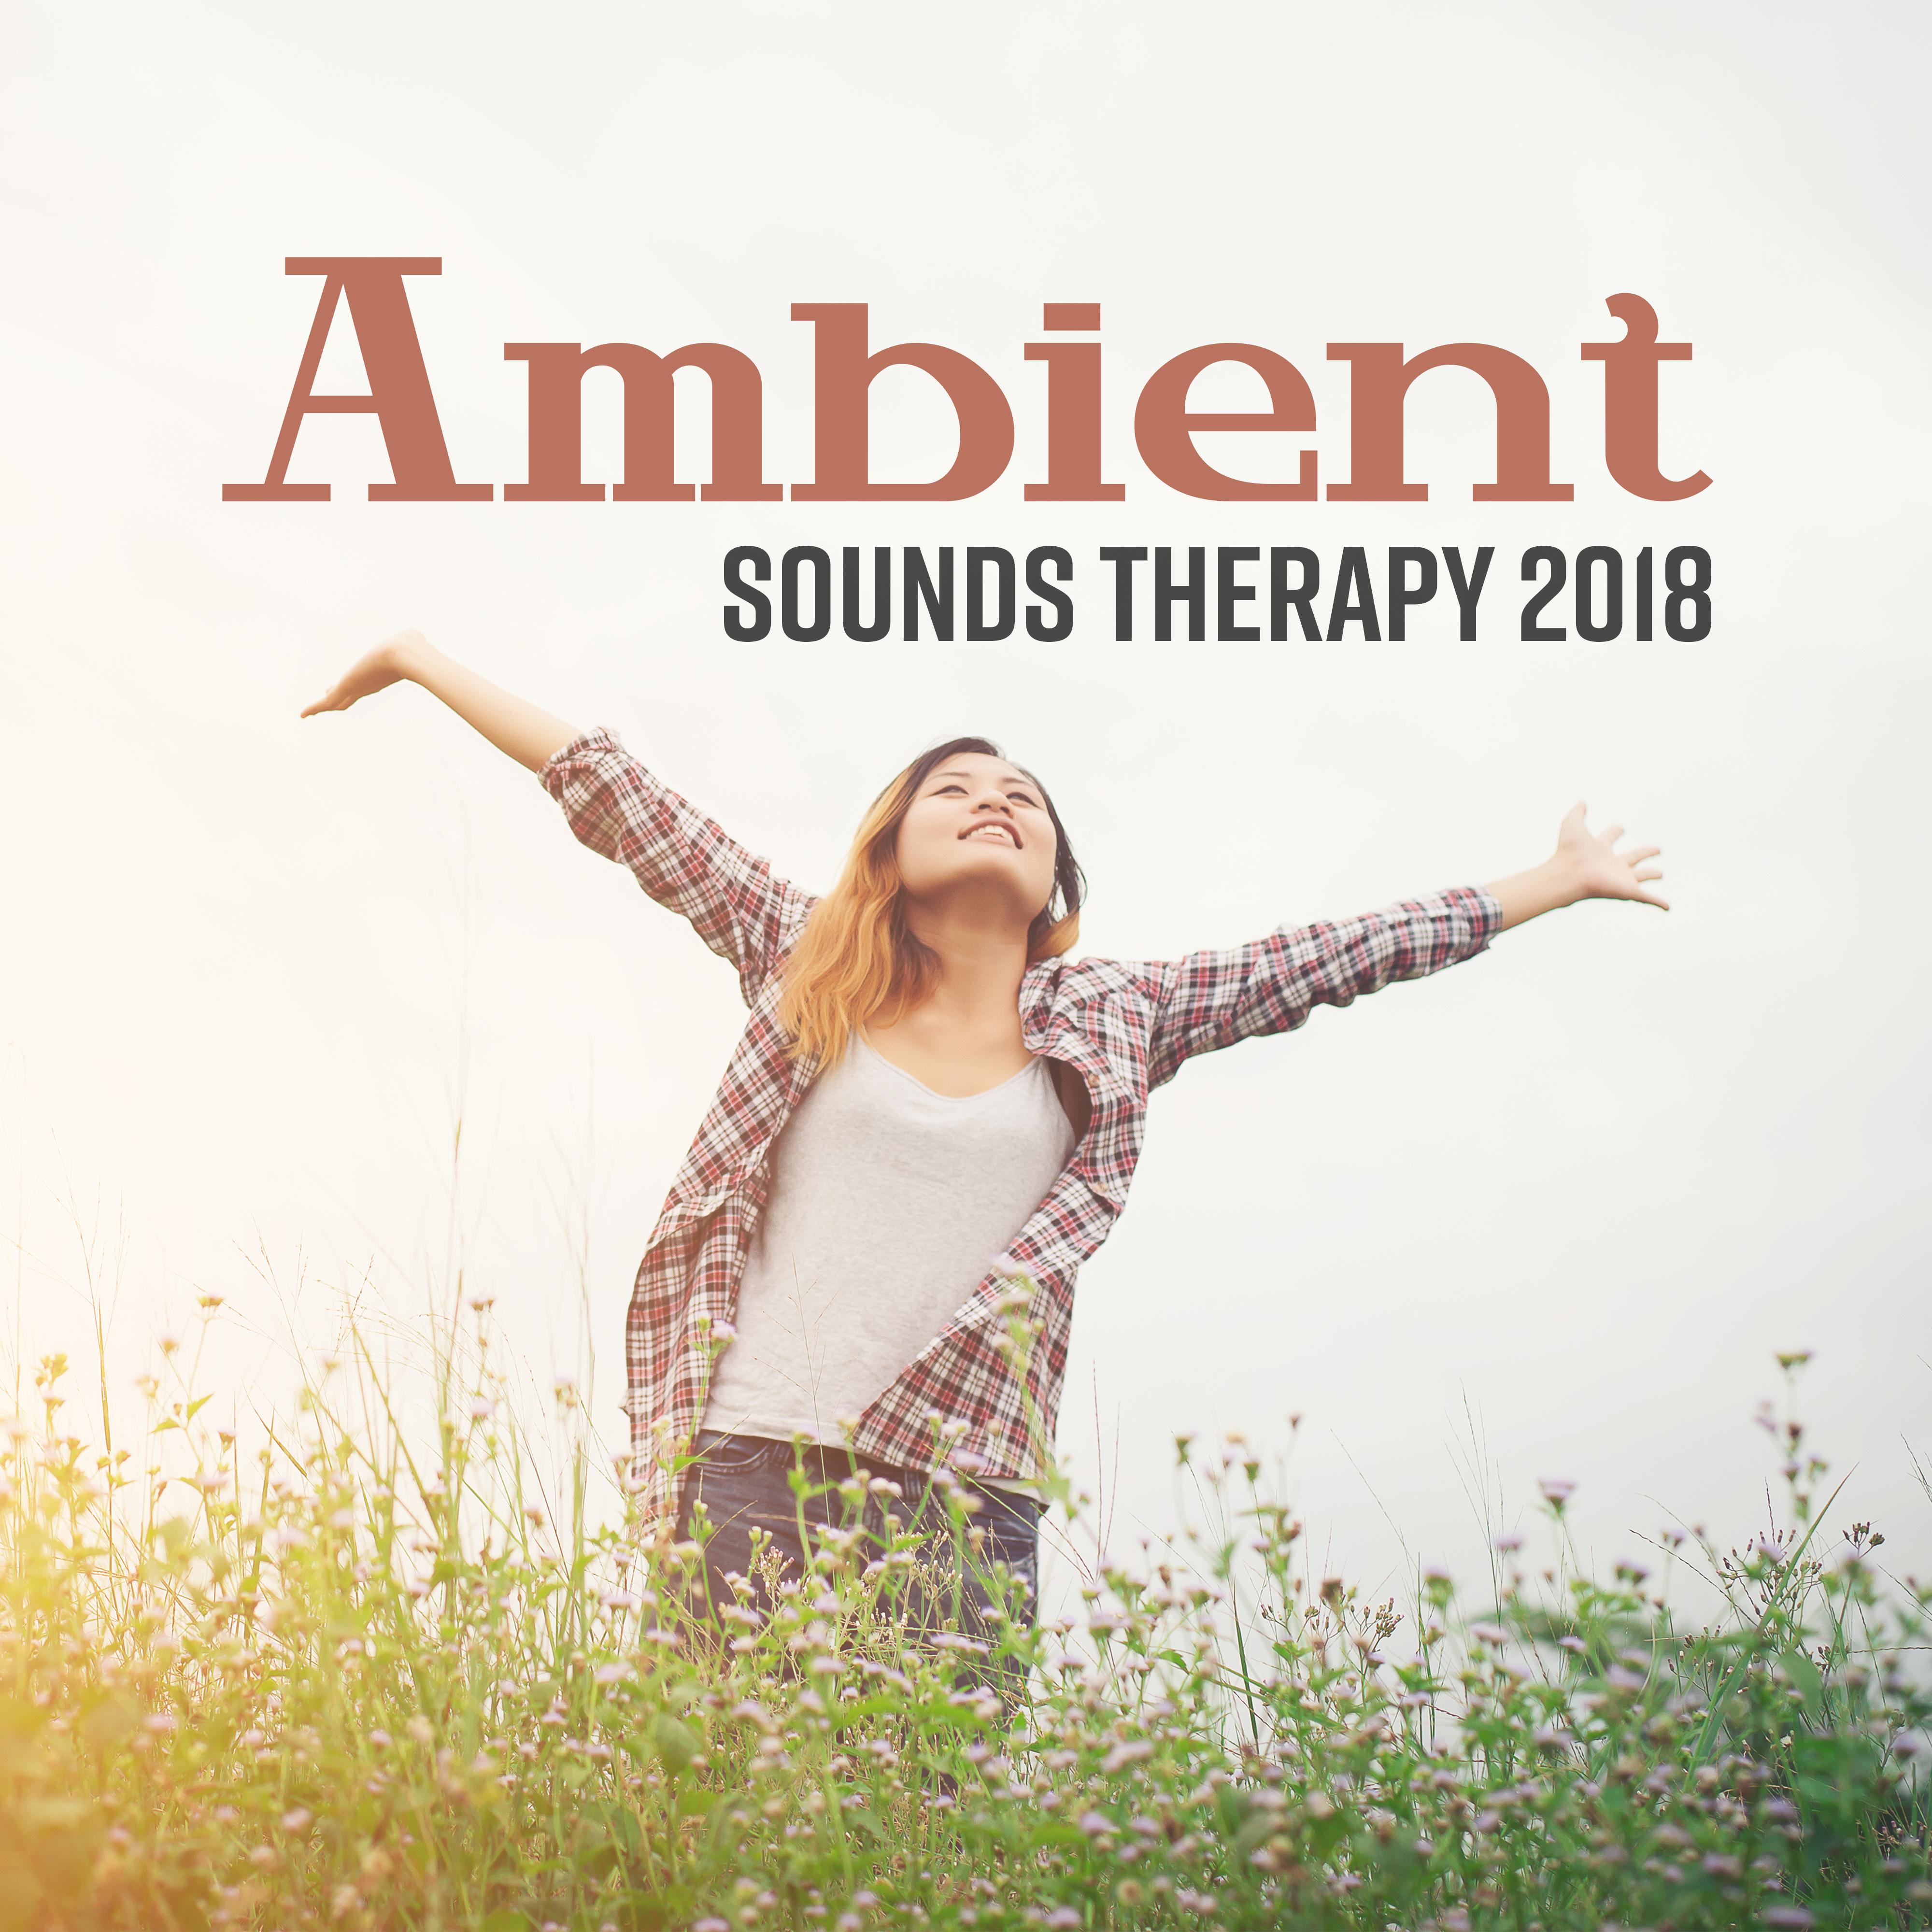 Ambient Sounds Therapy 2018